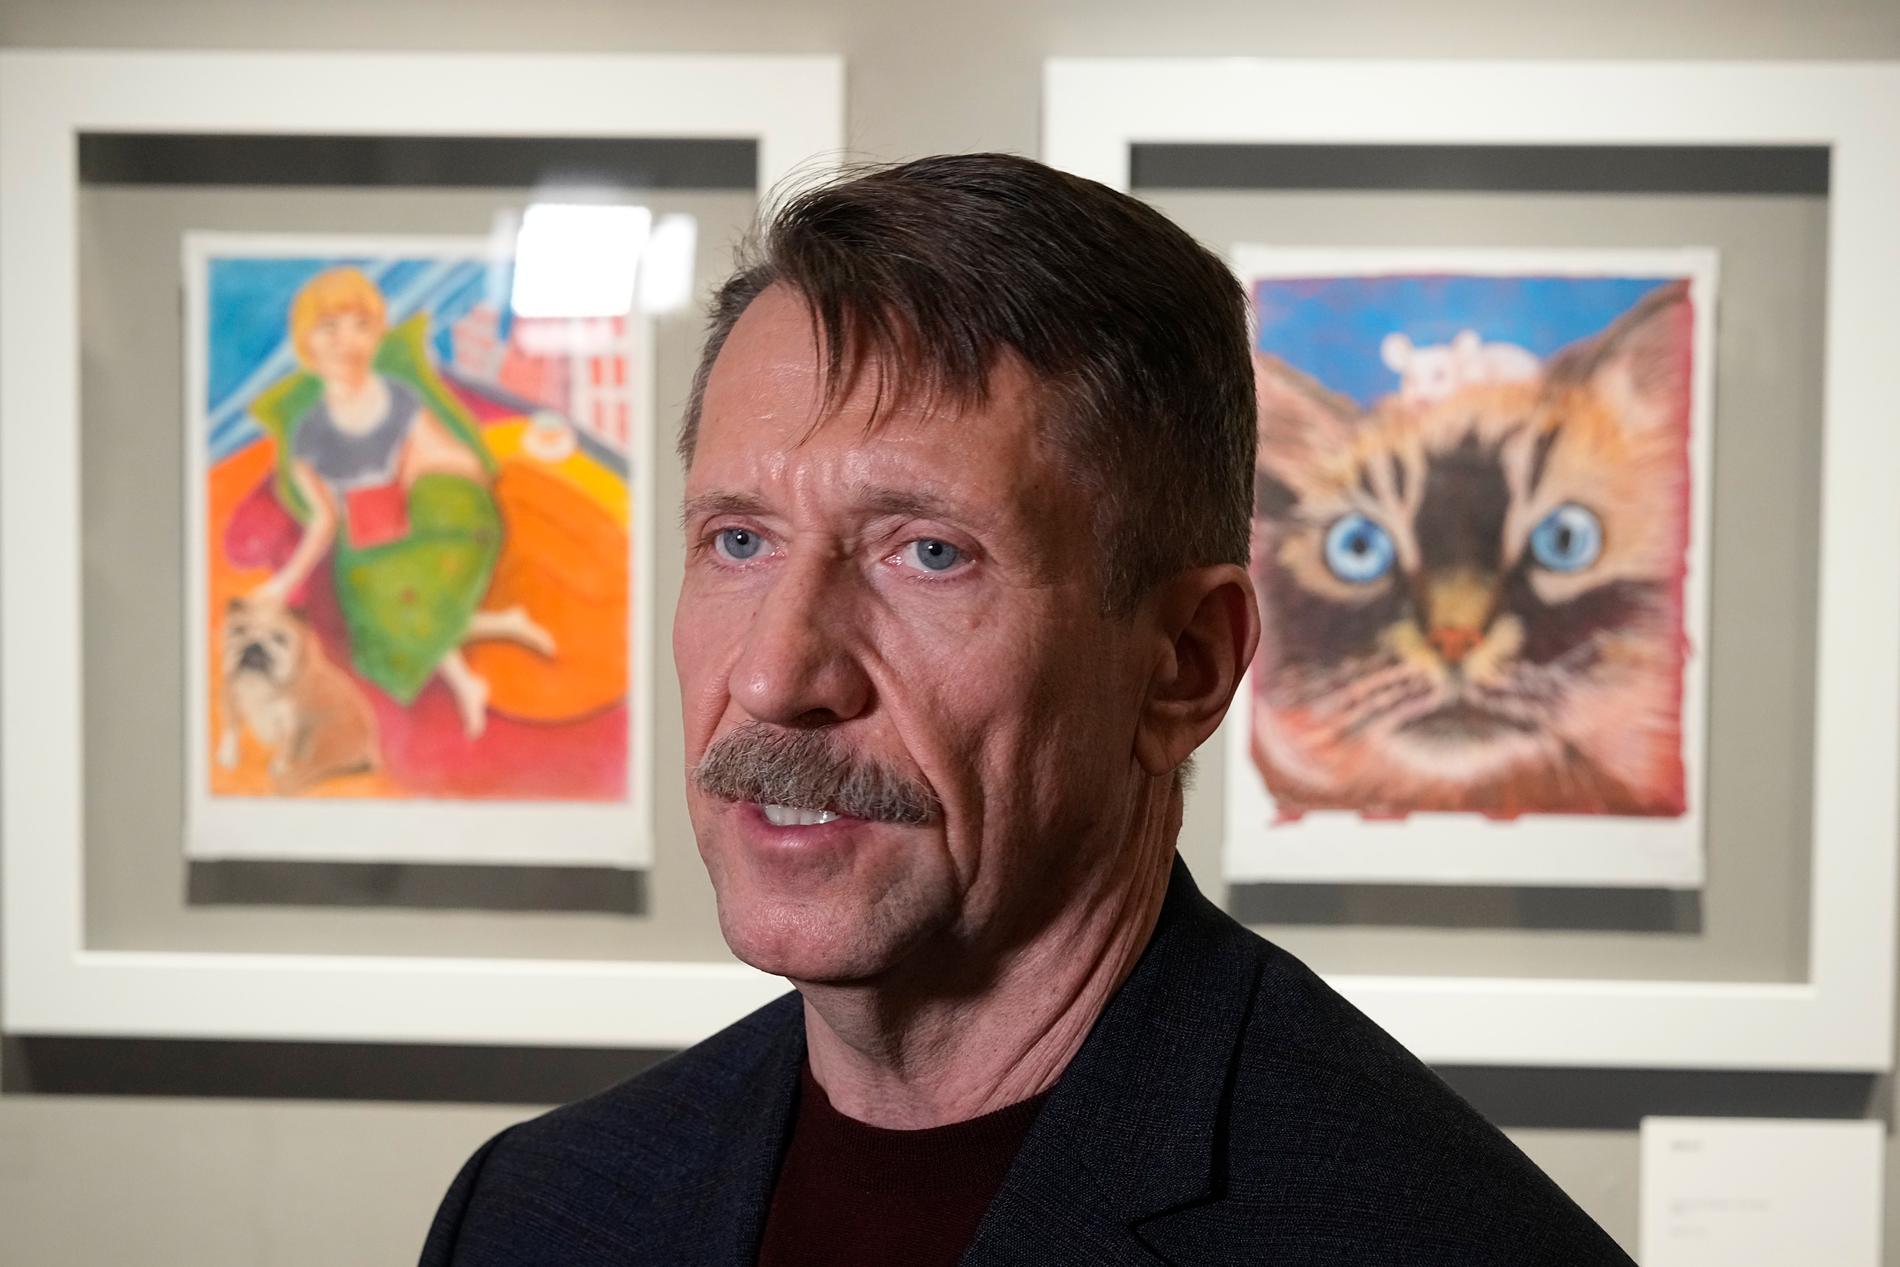 Artist: This spring, Viktor Bout exhibited his photographs at the Mosfilm headquarters in Moscow.